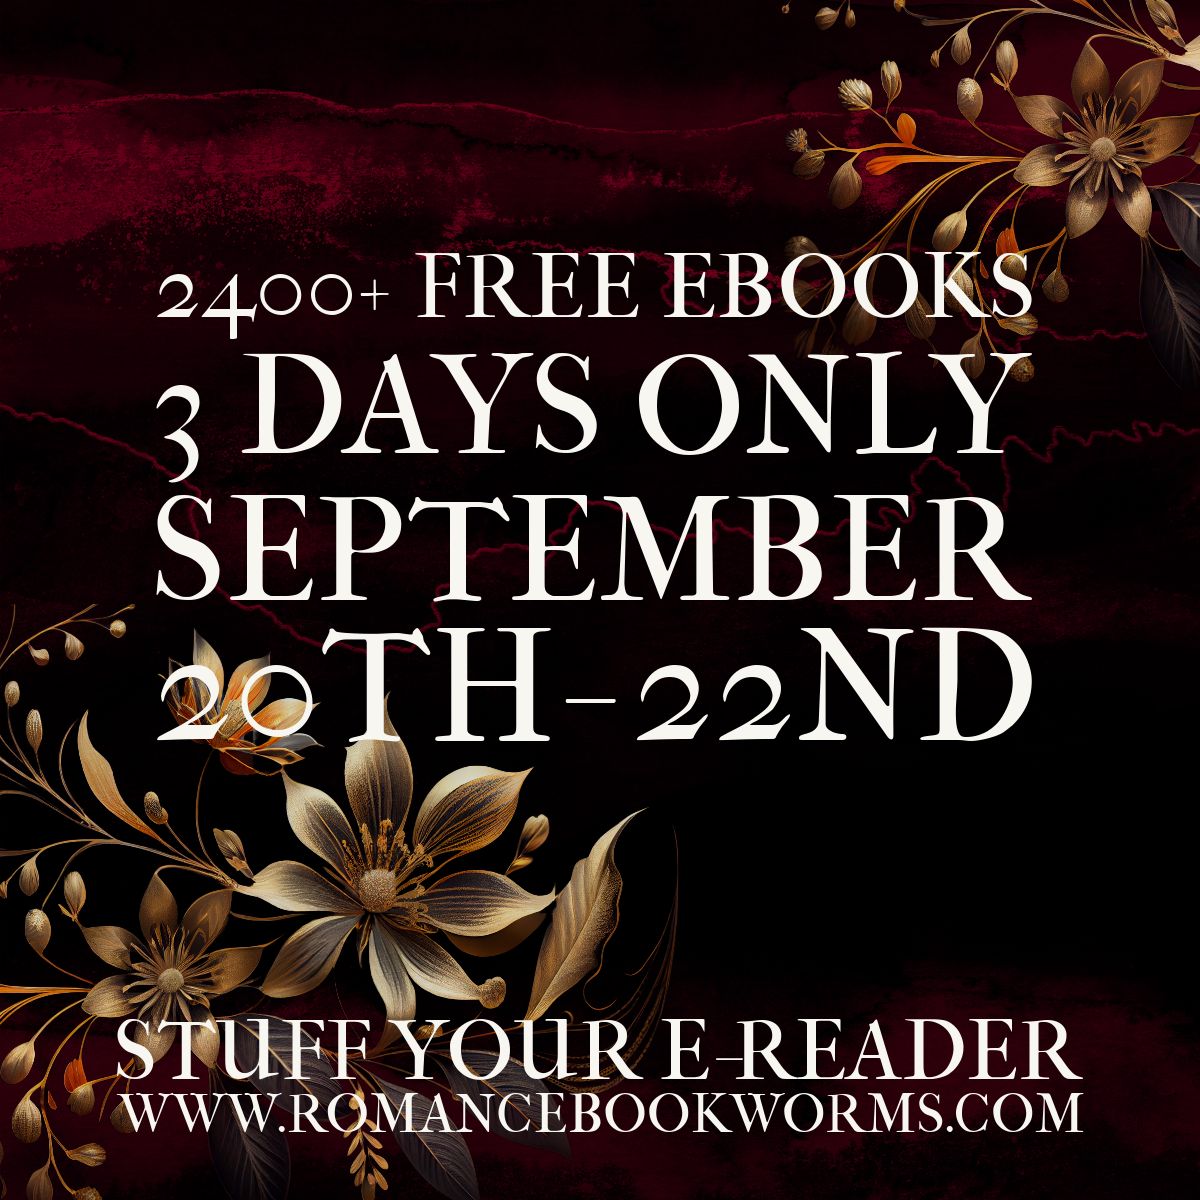 Looking for some passion and excitement? The Free Romance Reads event is here to satisfy your romantic cravings. Start reading now! 🔥❤️ #FreeRomanceReads #RomanceAddicts
romancebookworms.com